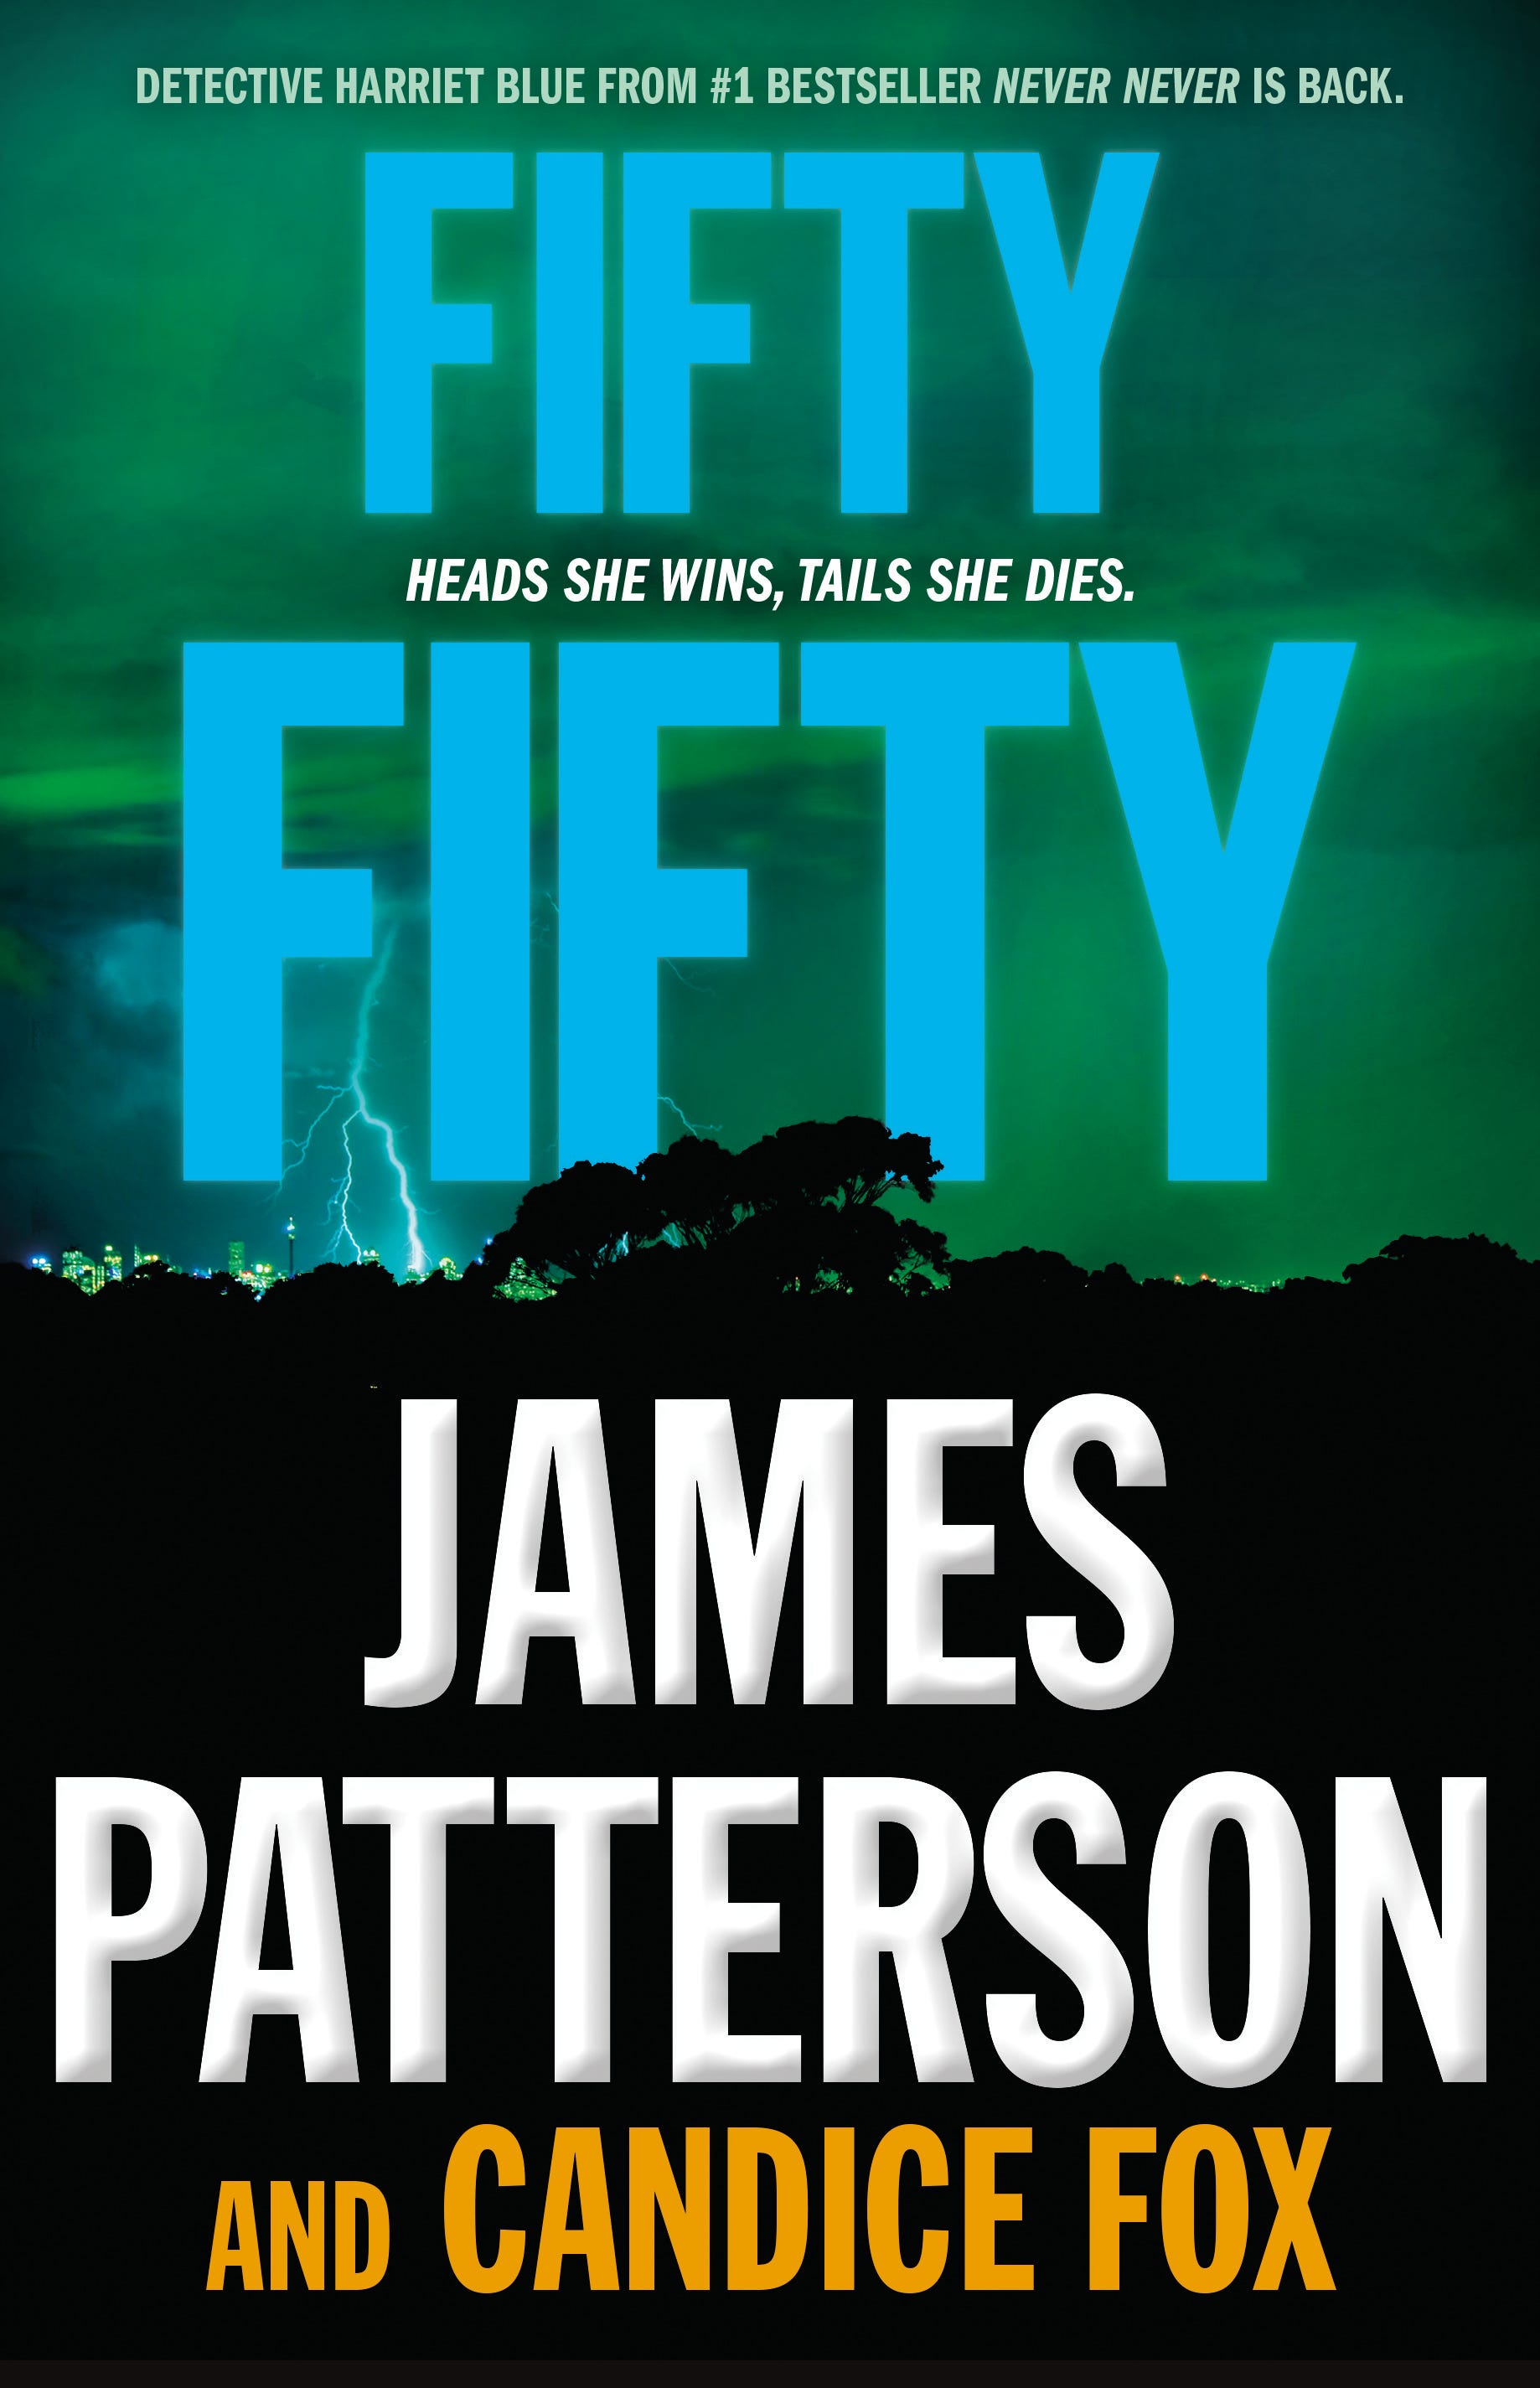 list of james patterson books in order by year